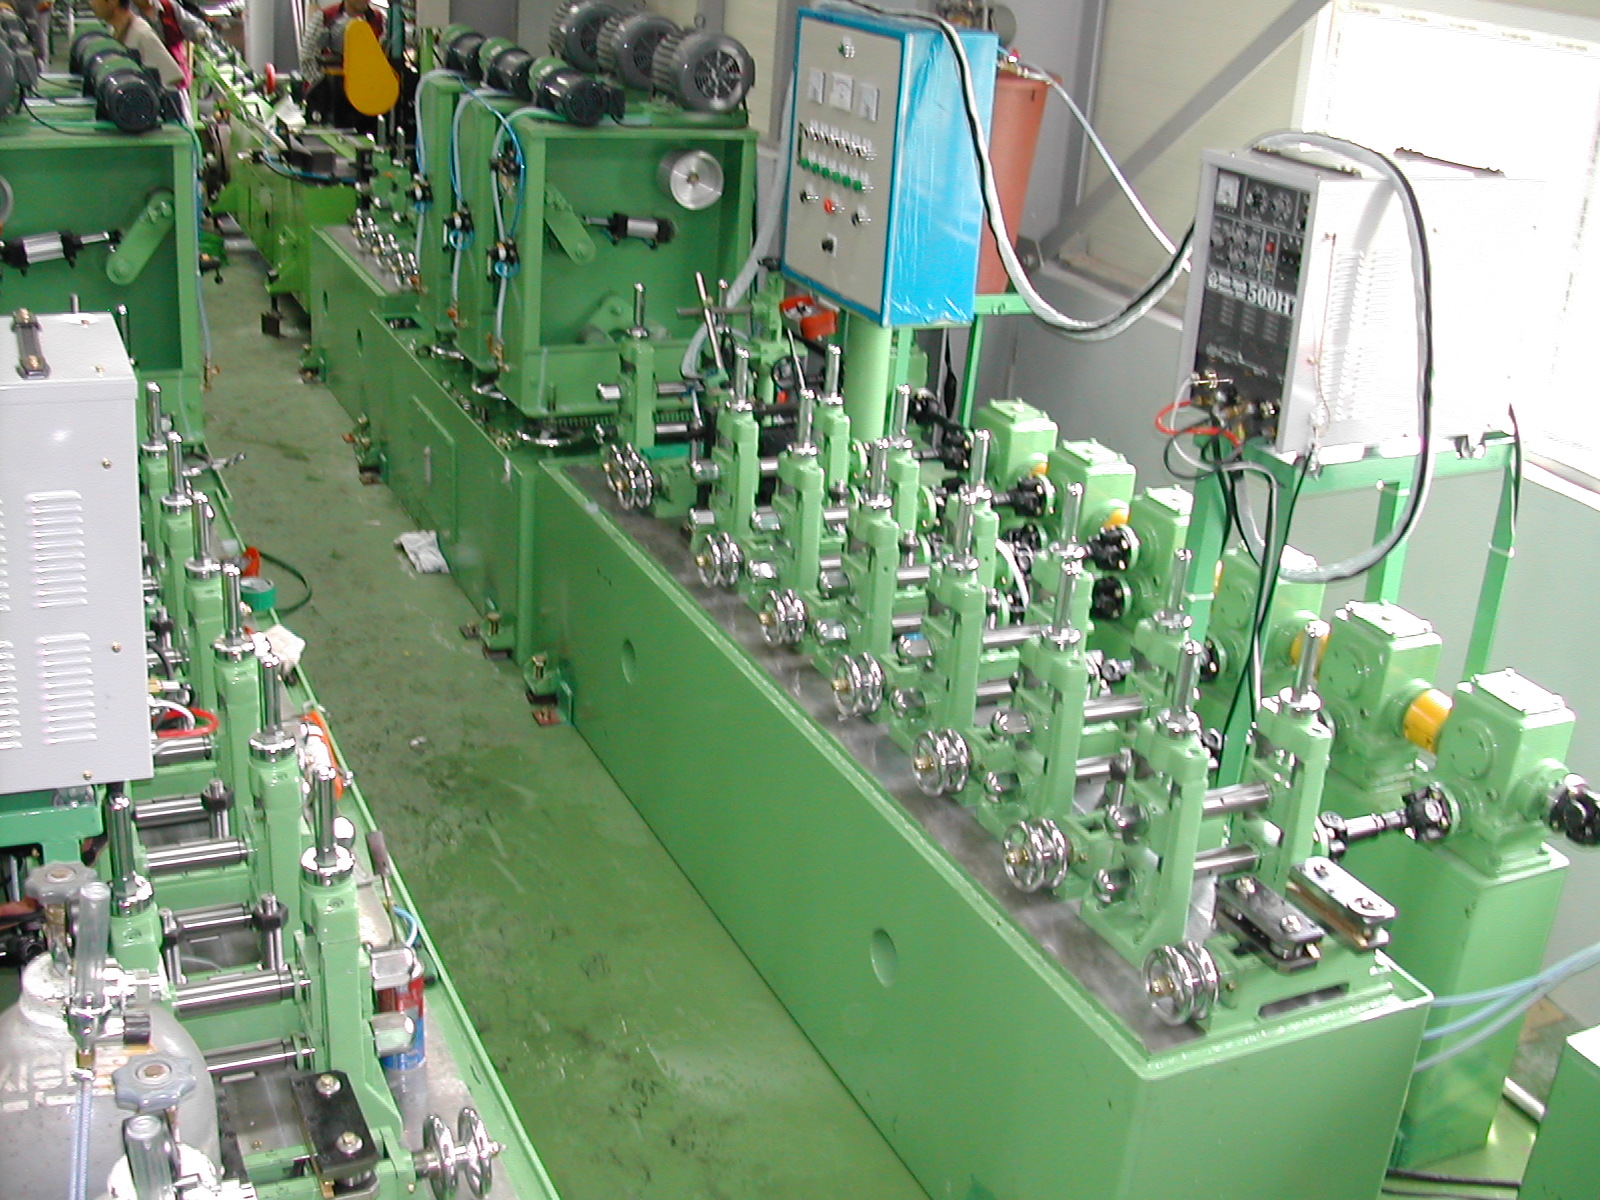 stainless tube mill